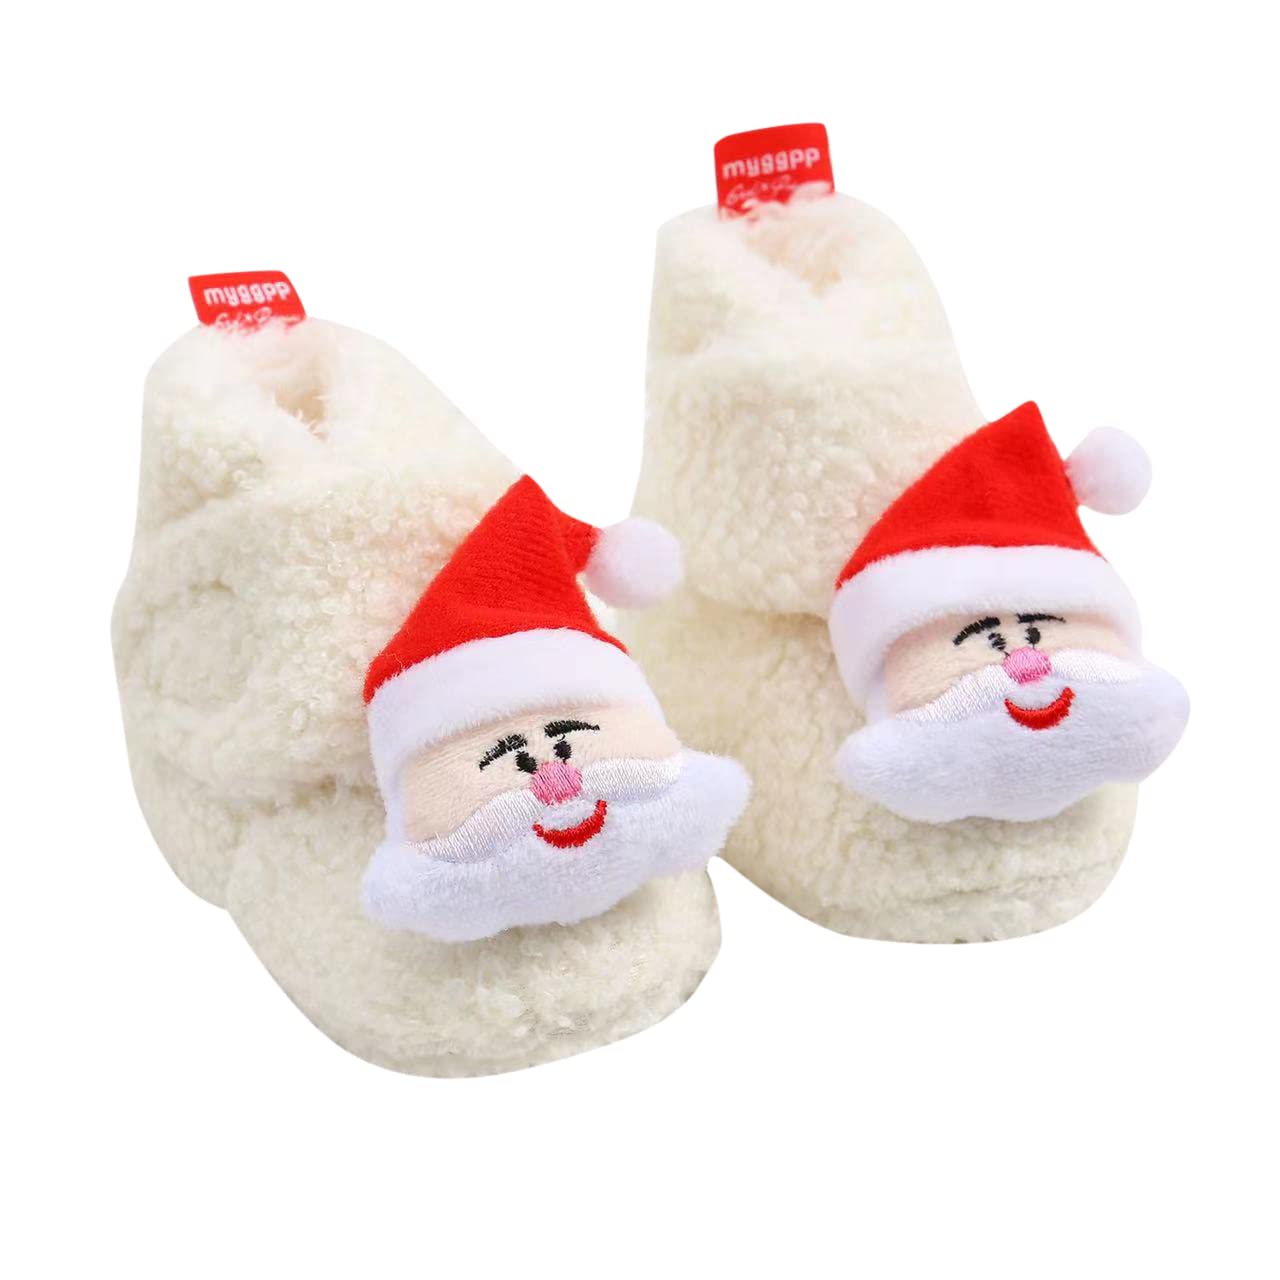 LIVEBOX Baby Booties Toddler Infants christmas Slippers Soft Fleece crib Shoes for Newborn Boy girl 3 6 Months